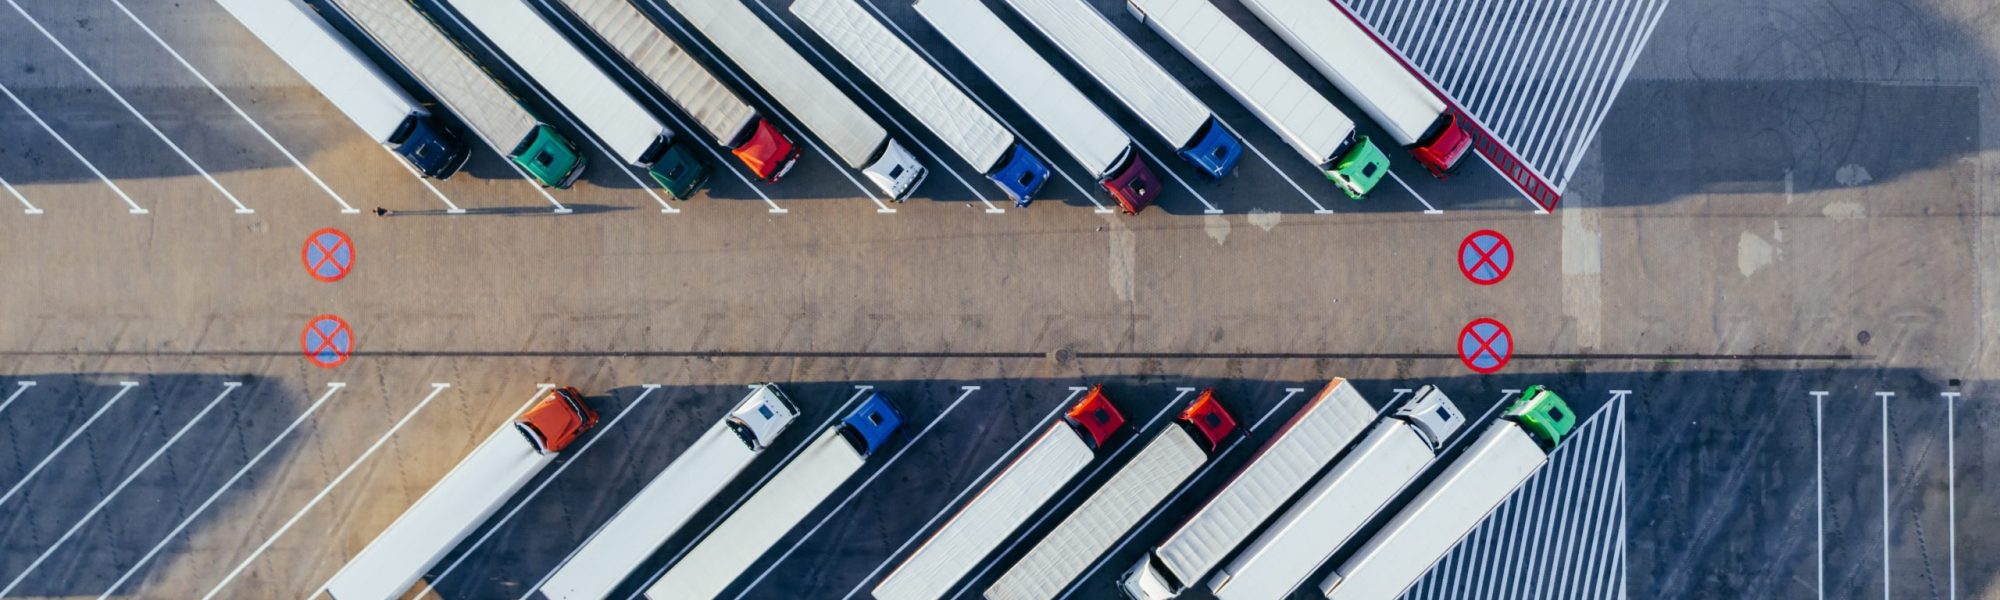 aerial-photography-of-trucks-parked-2800121